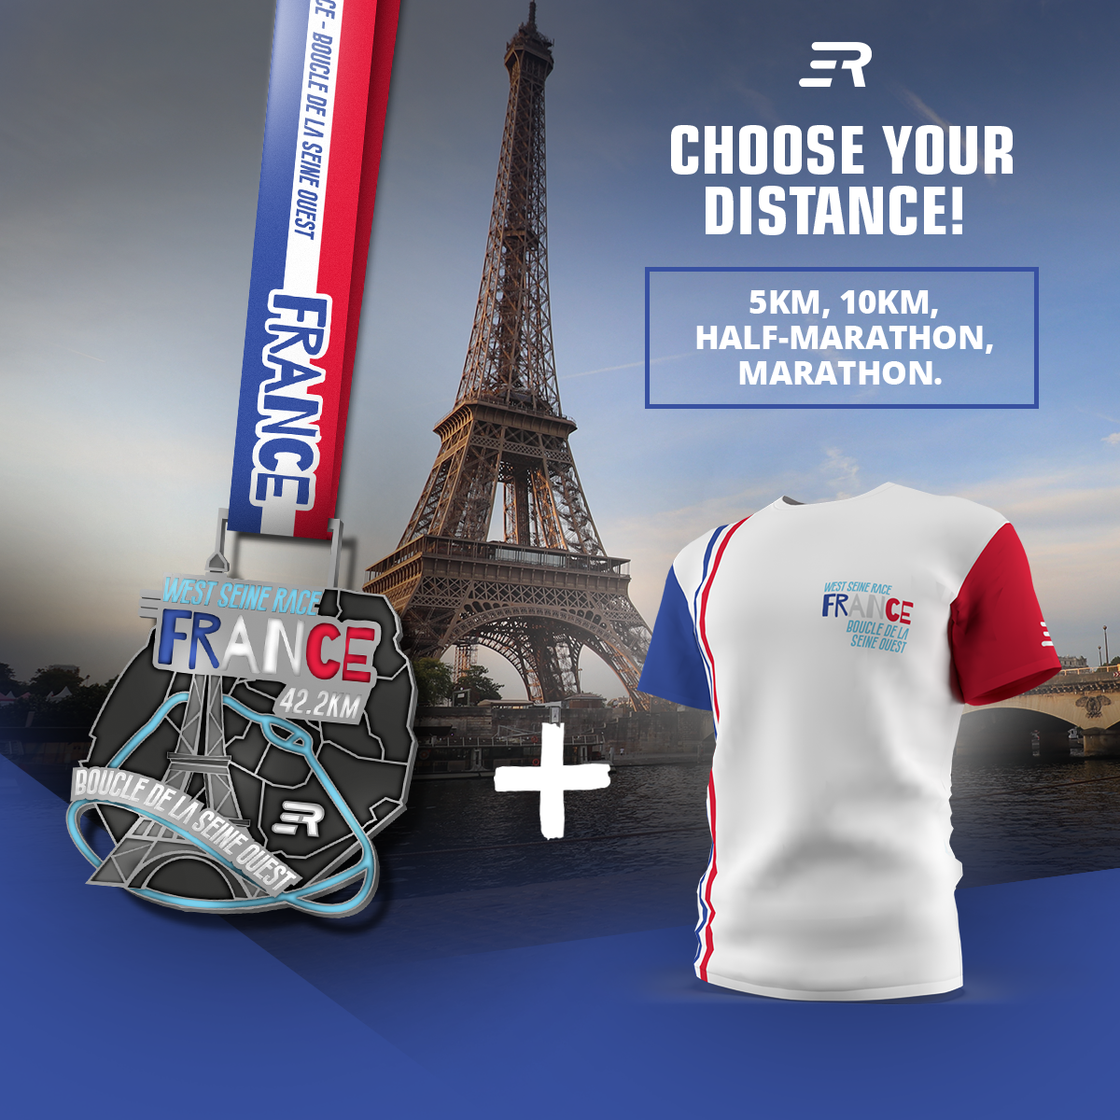 SPECIAL OFFER: Stunning Medal + Official T-Shirt | France - West Seine Race